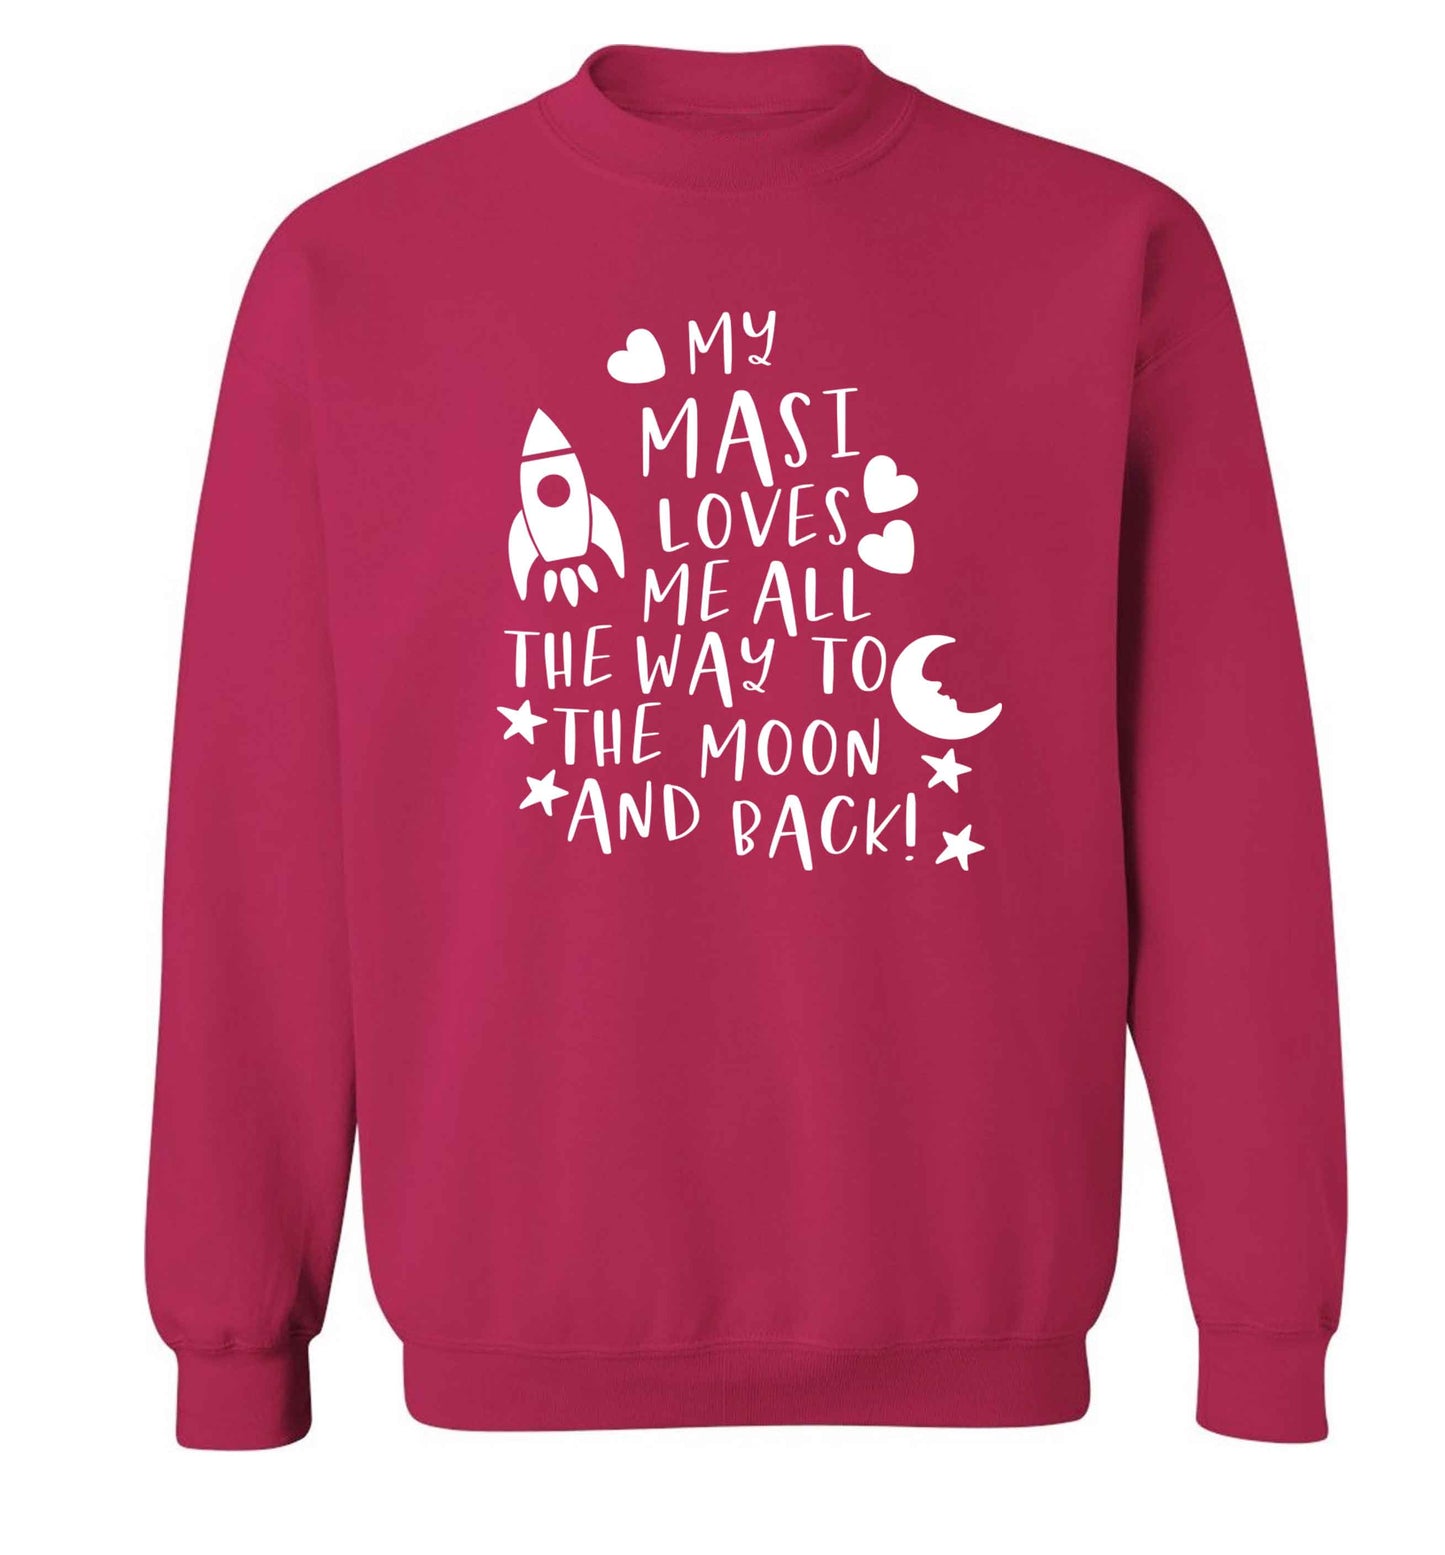 My masi loves me all the way to the moon and back Adult's unisex pink Sweater 2XL